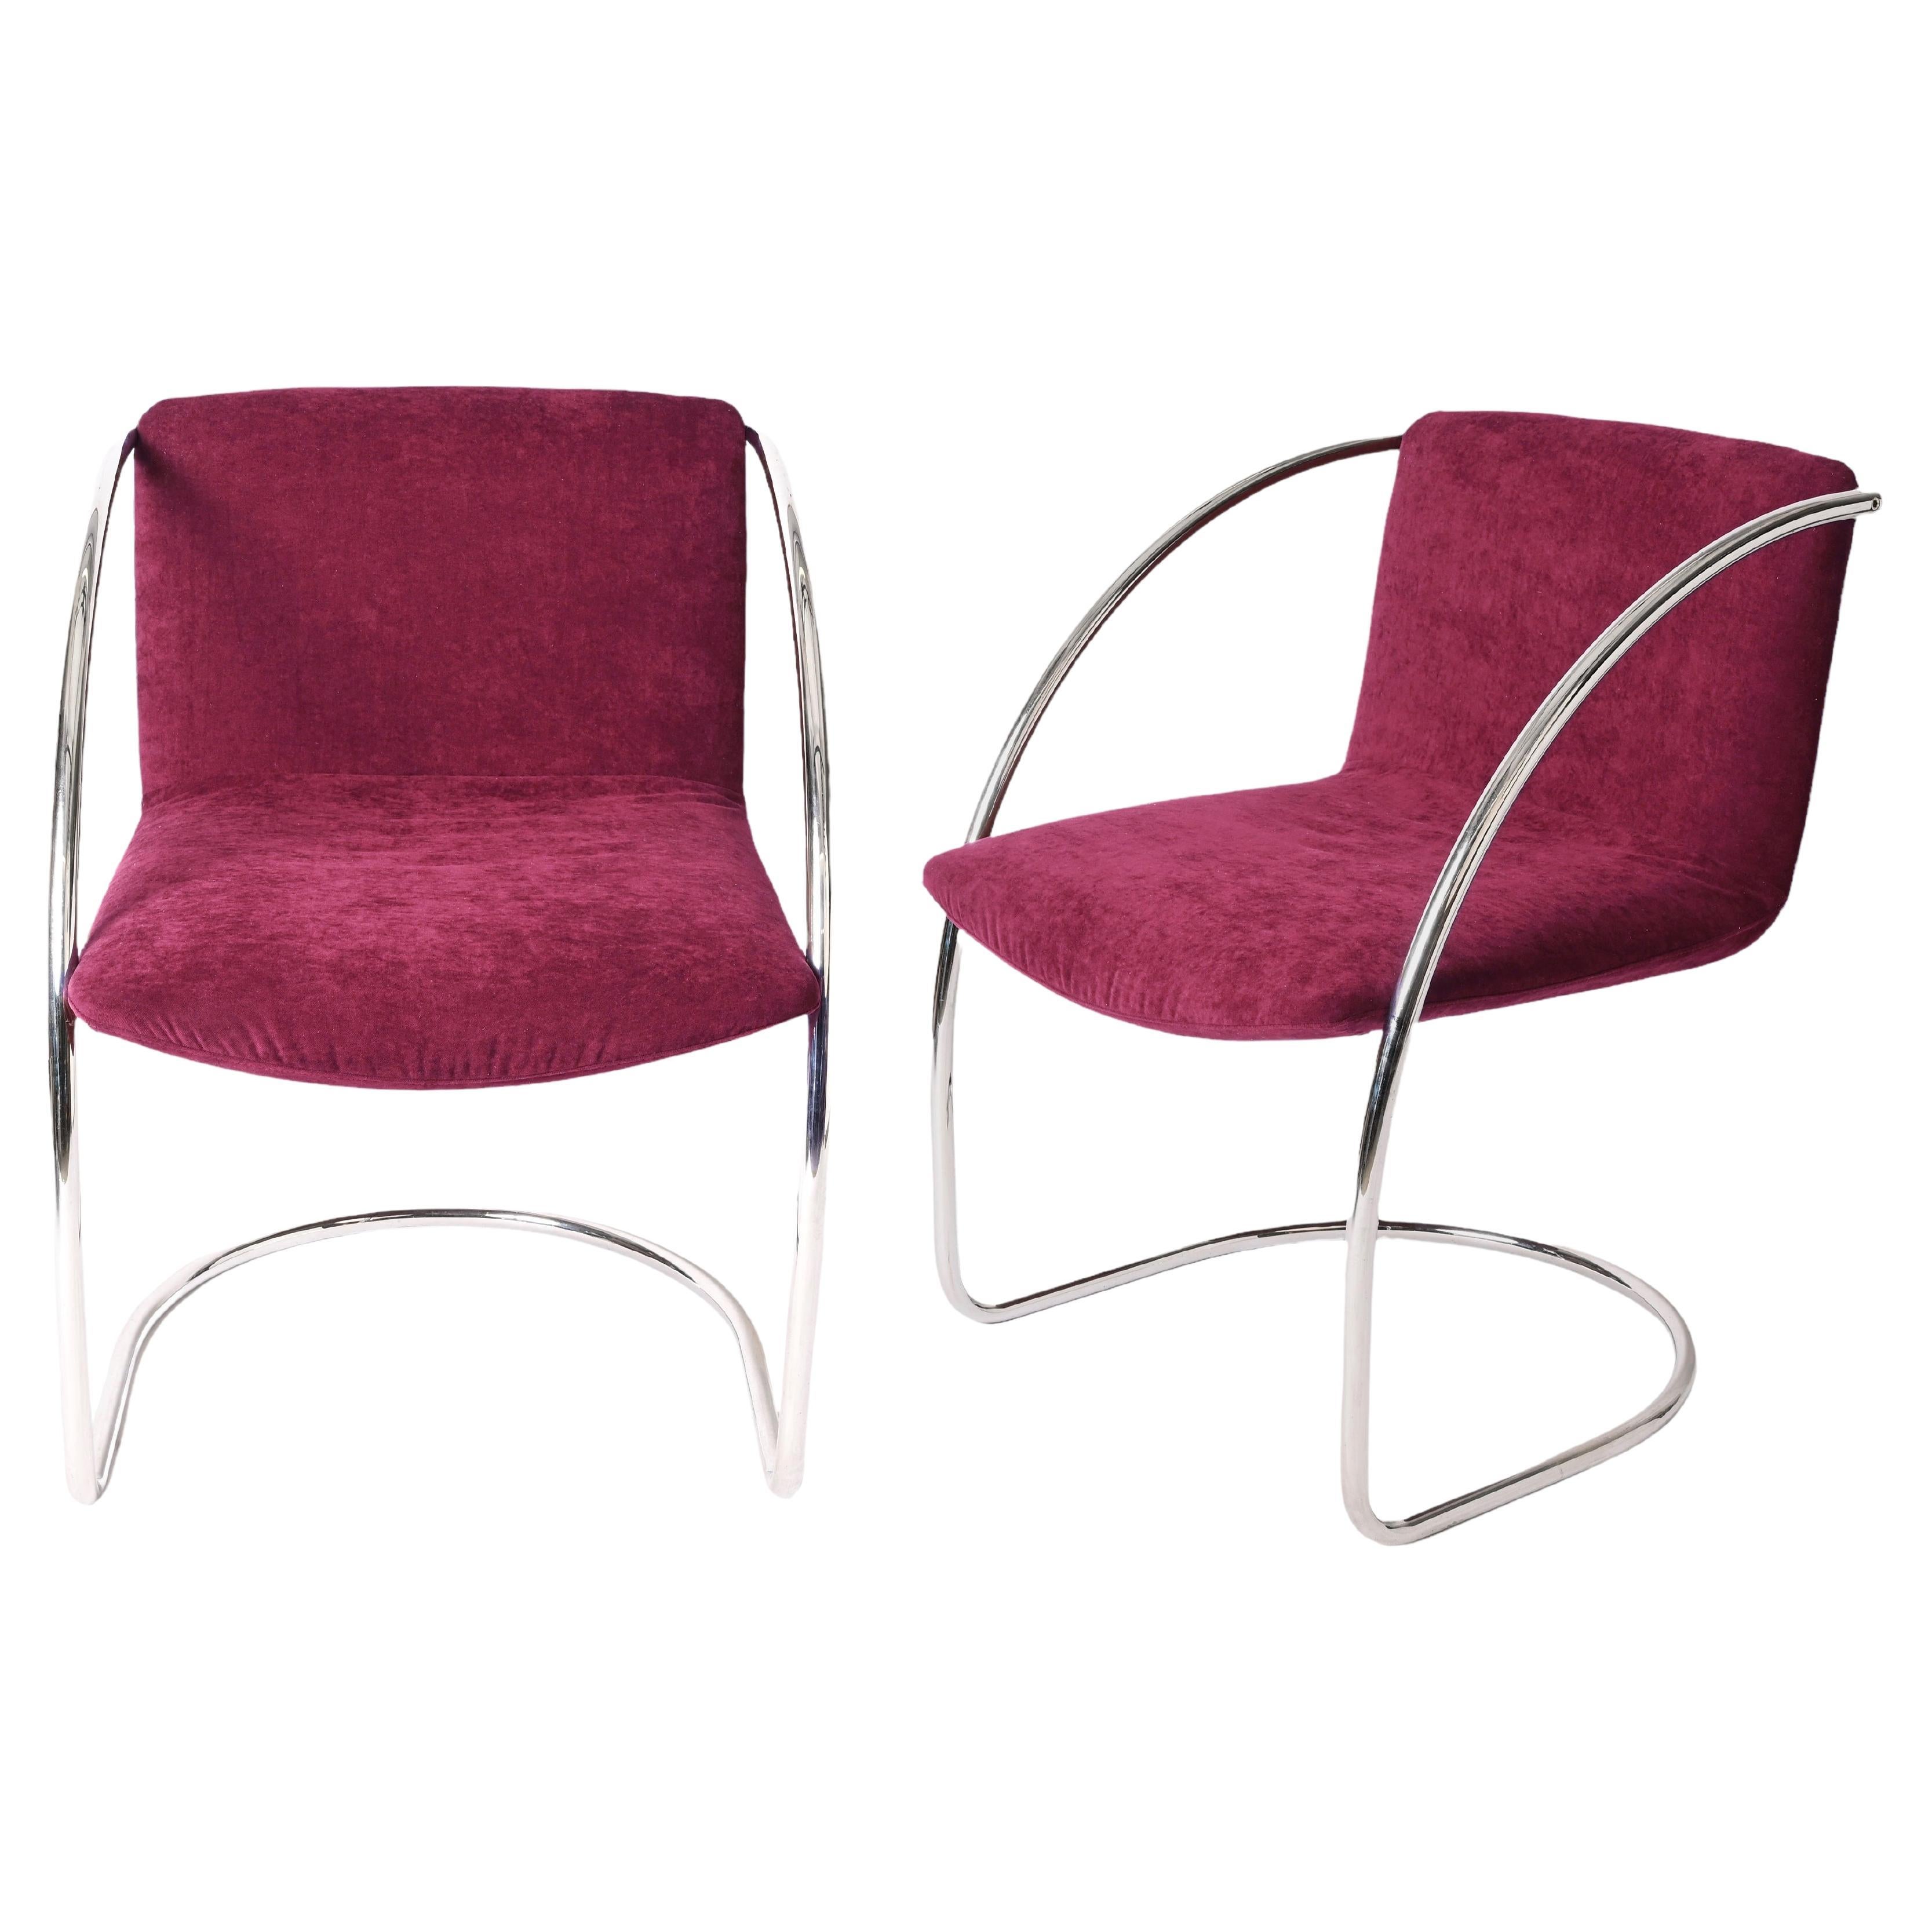 Pair of G. Offredi Plum Fabric and Steel Italian "Lens" Chairs for Saporiti 1968